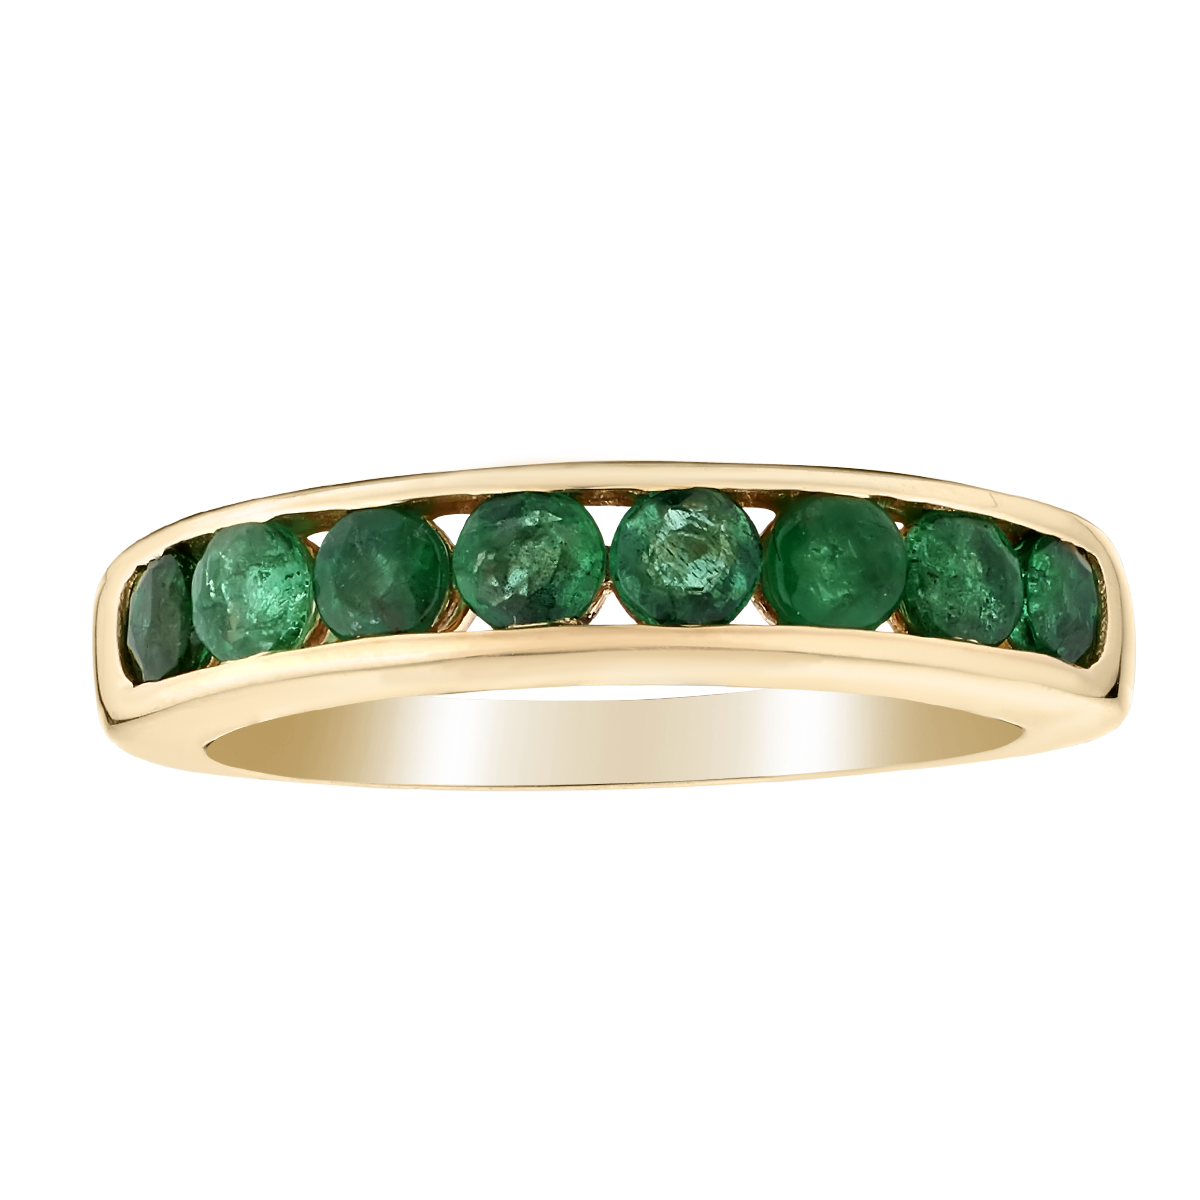 1.00 Carat Genuine Emerald Band Ring, 14kt Yellow Gold...............Now